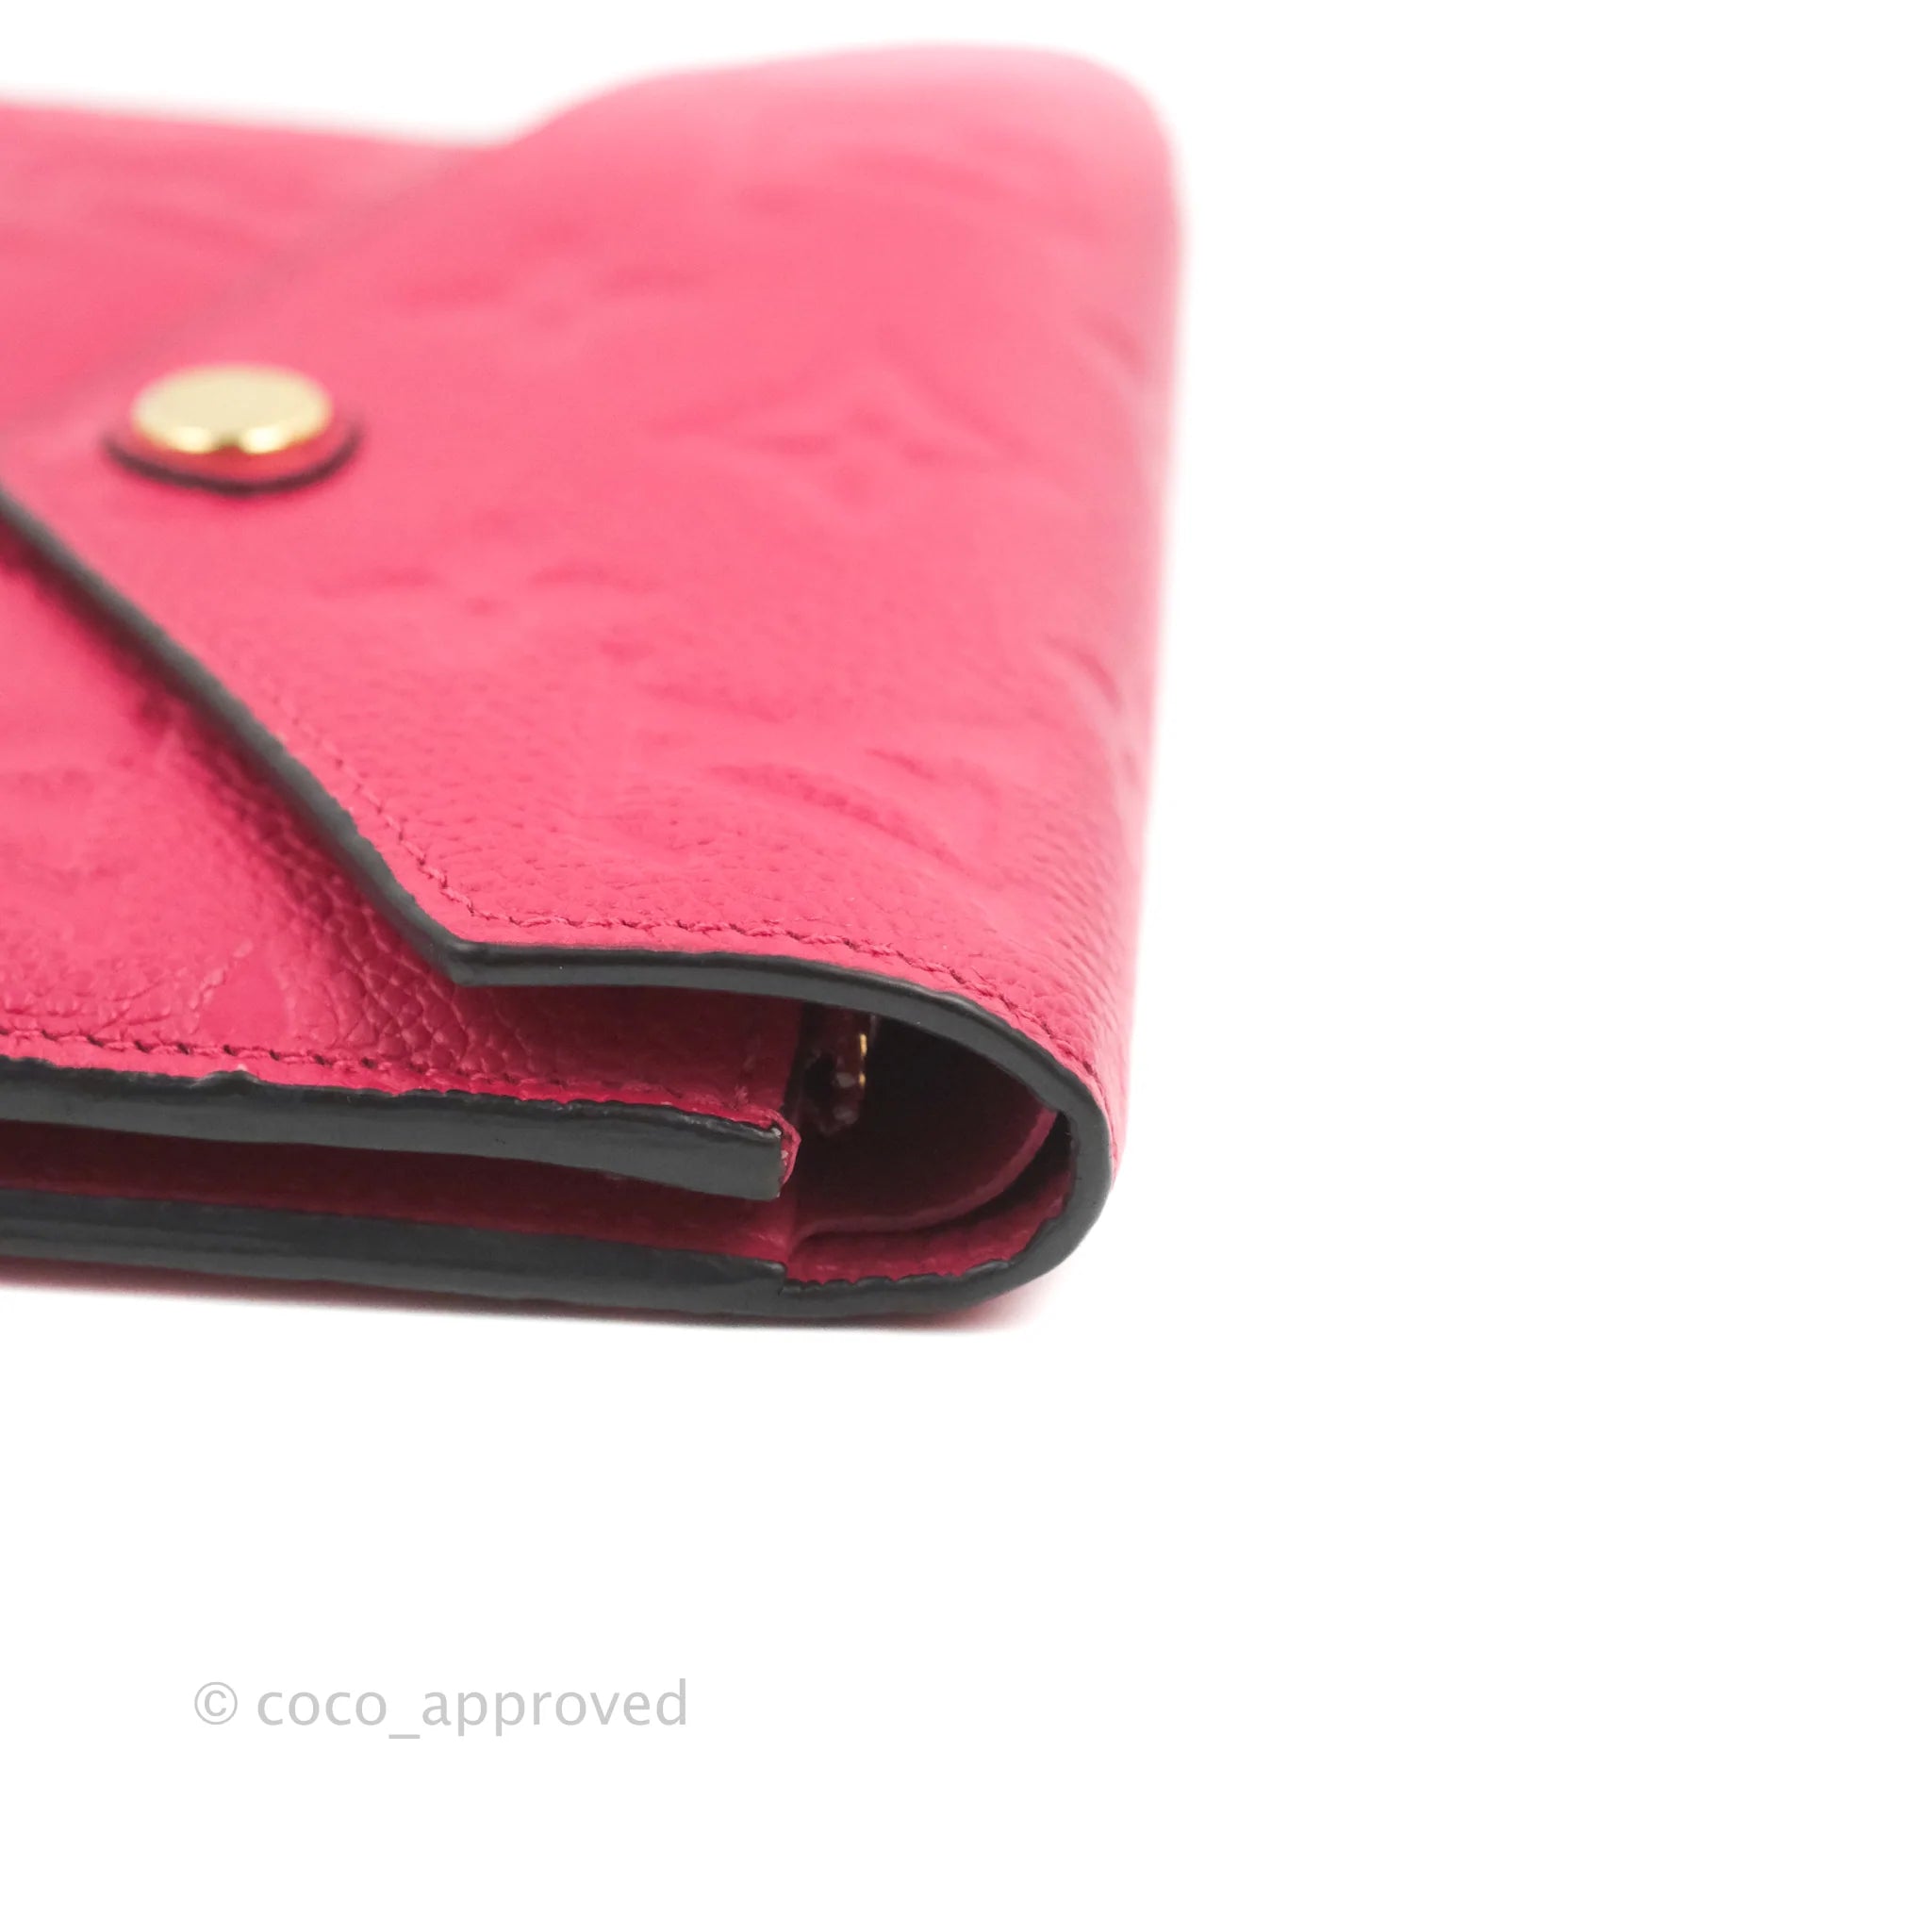 Victorine leather wallet Louis Vuitton Pink in Leather - 37457183